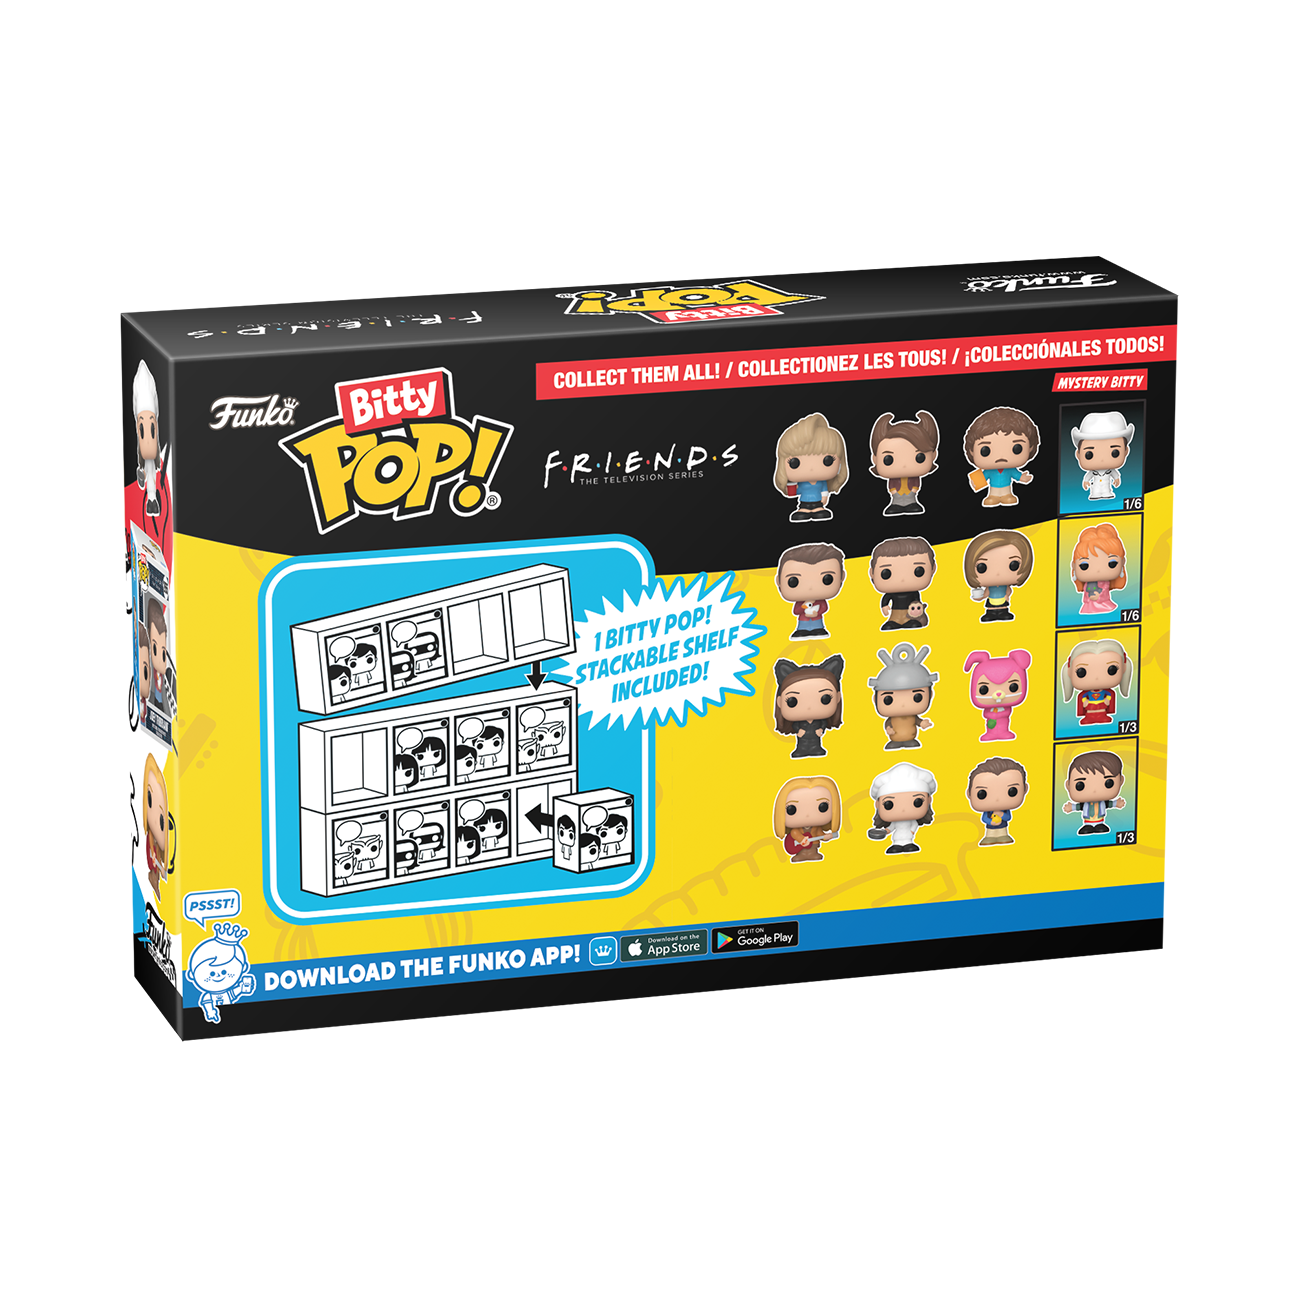 Bitty Pop! Five Nights at Freddy's 4-Pack Series 3